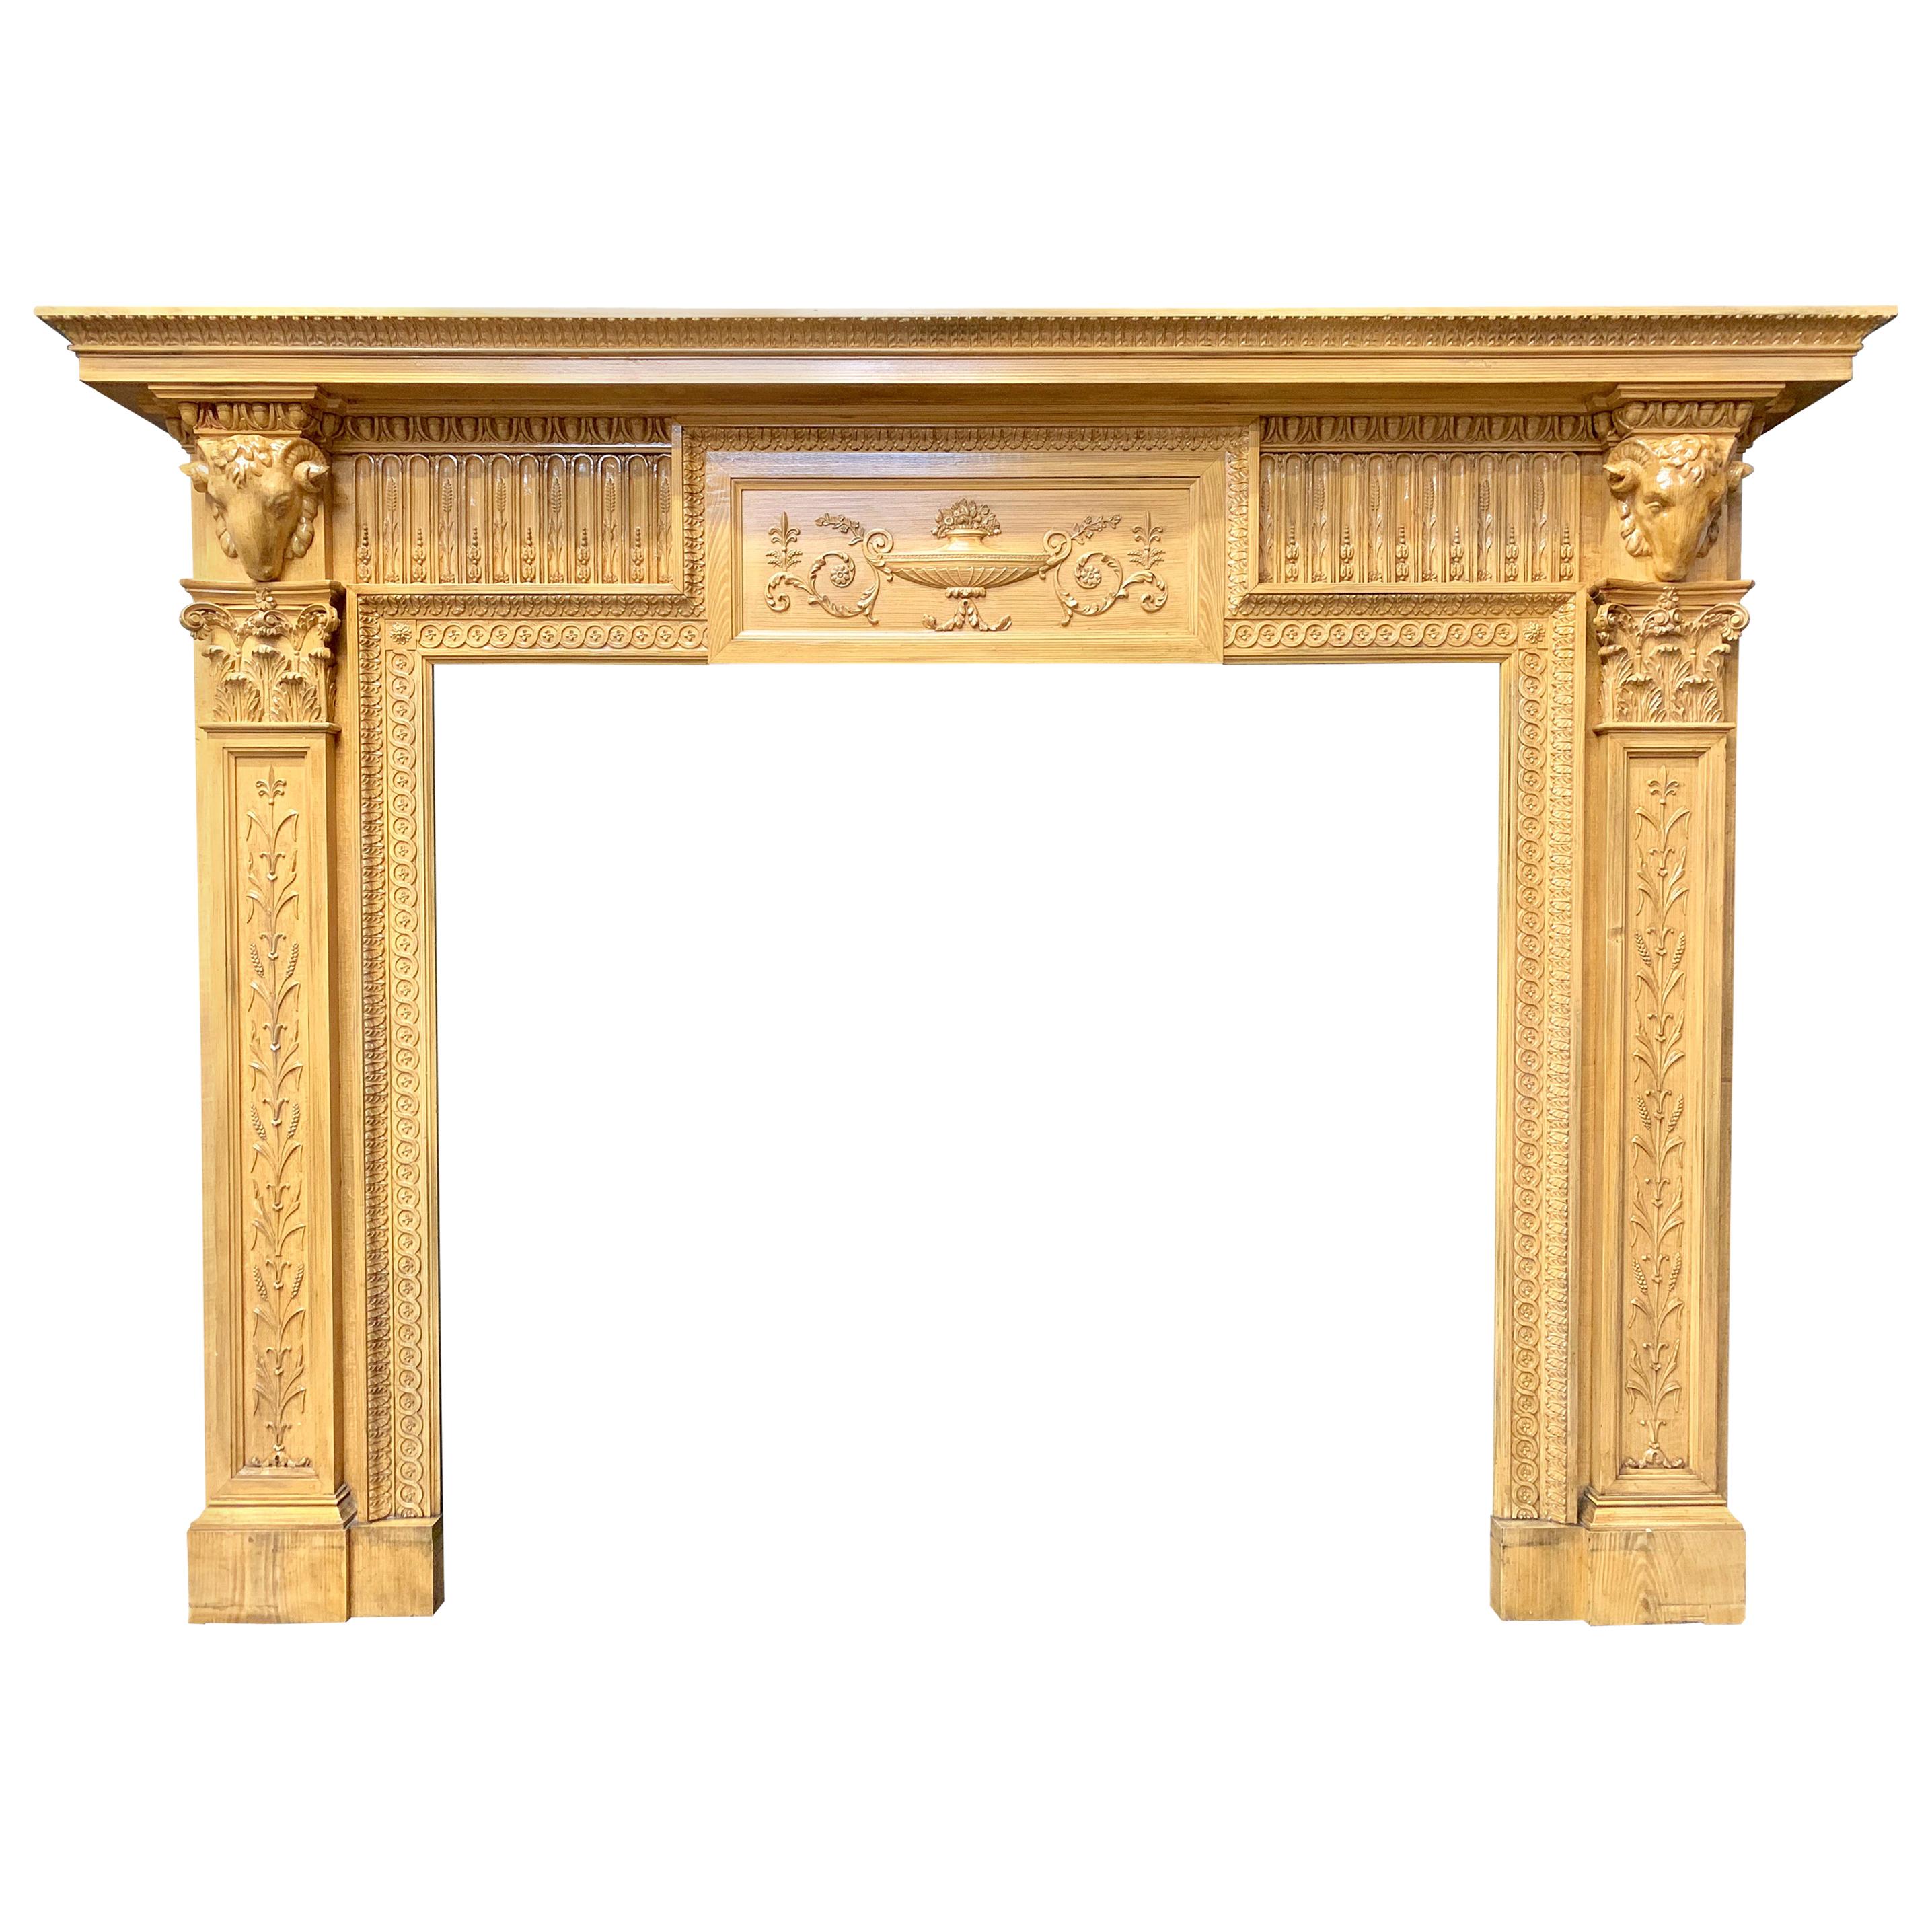 Large 19th Century Pine and Gesso Georgian Style Fireplace Surround